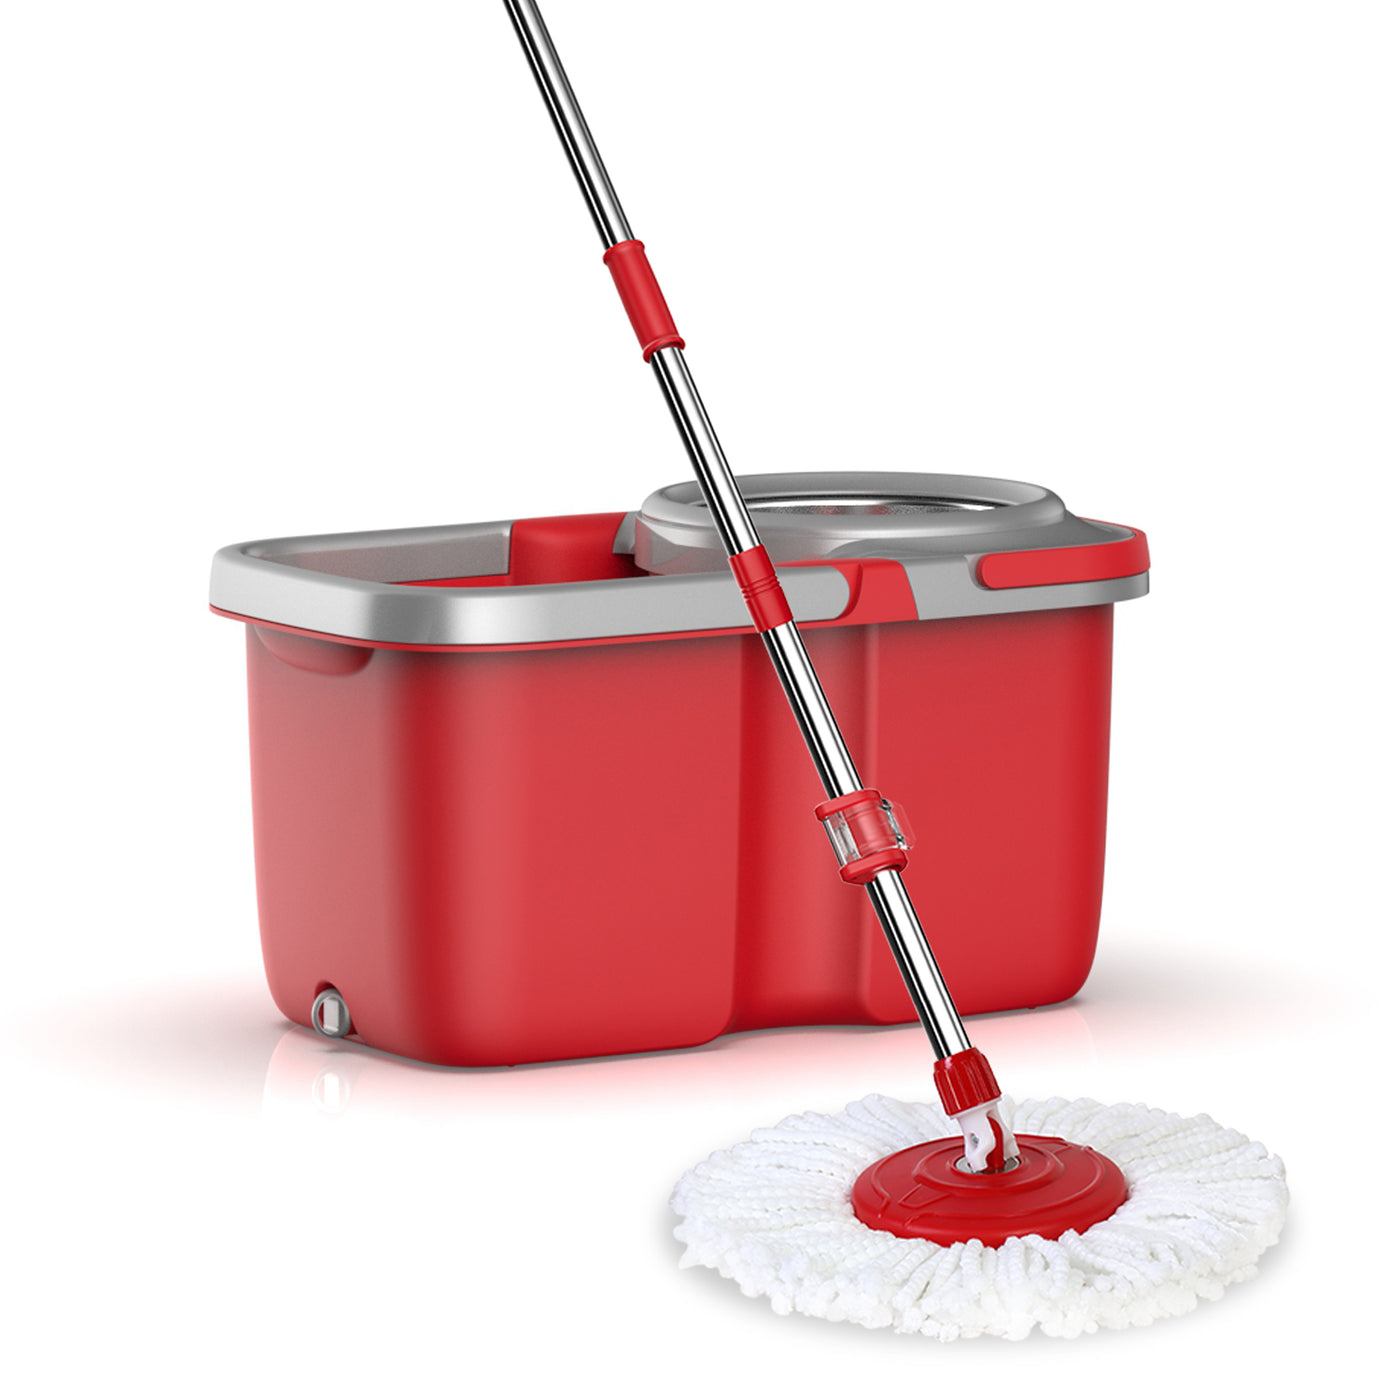 Spin Mop Bucket, 360 Spin Mop and Bucket System with 3 Mop Heads, Stainless Steel Spin Bucket Mop for Floor Cleaning